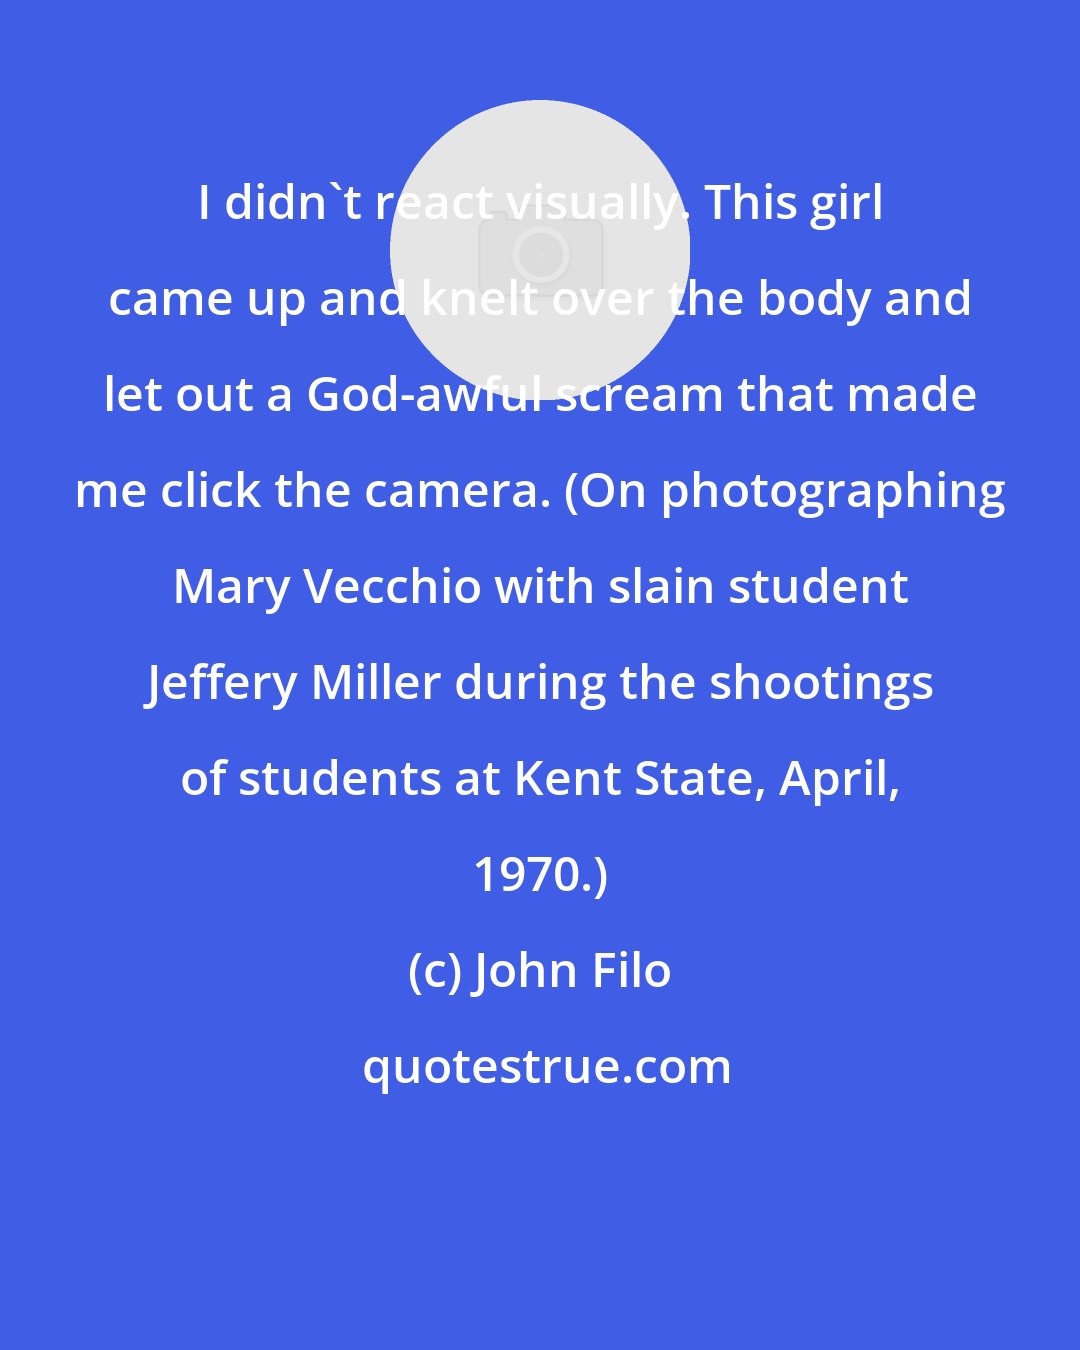 John Filo: I didn't react visually. This girl came up and knelt over the body and let out a God-awful scream that made me click the camera. (On photographing Mary Vecchio with slain student Jeffery Miller during the shootings of students at Kent State, April, 1970.)